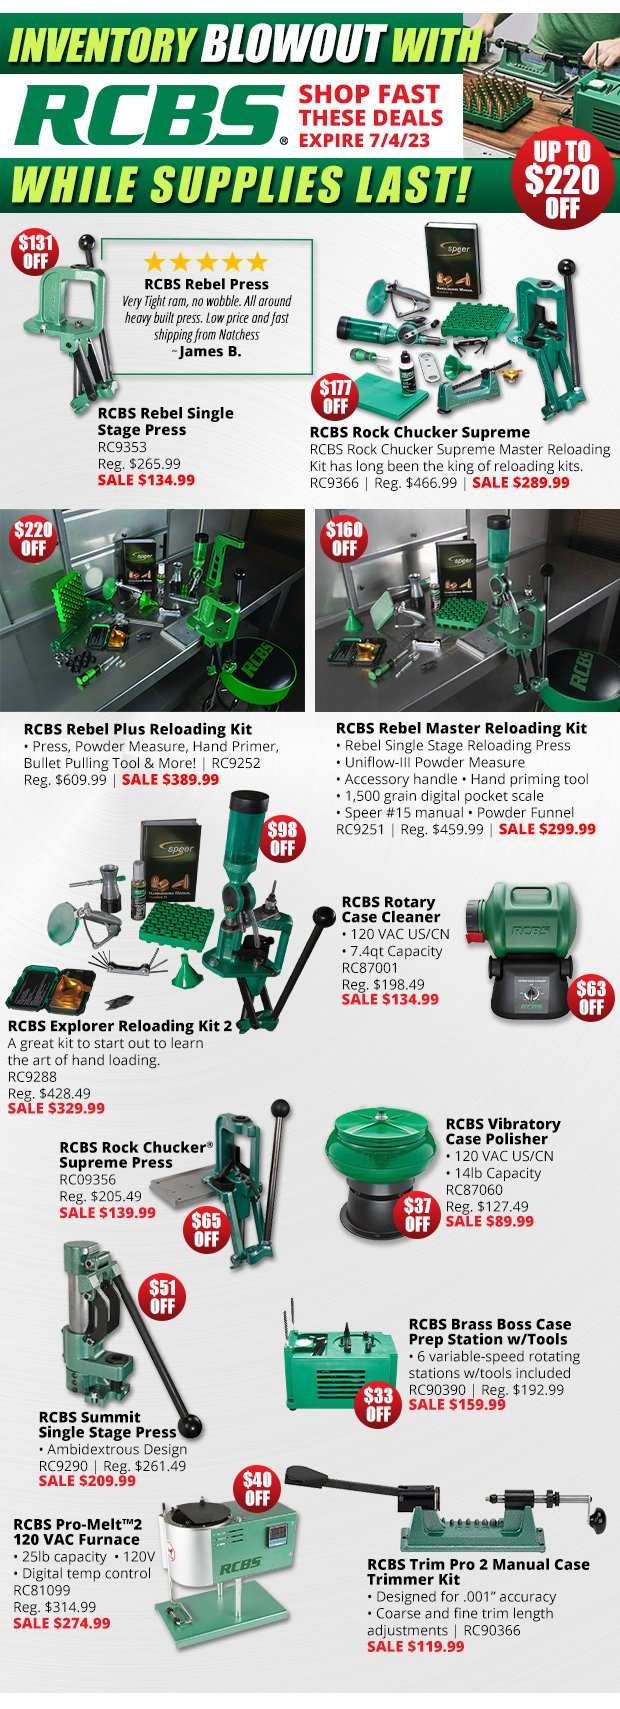 Inventory Blowout with RCBS While Supplies Last 